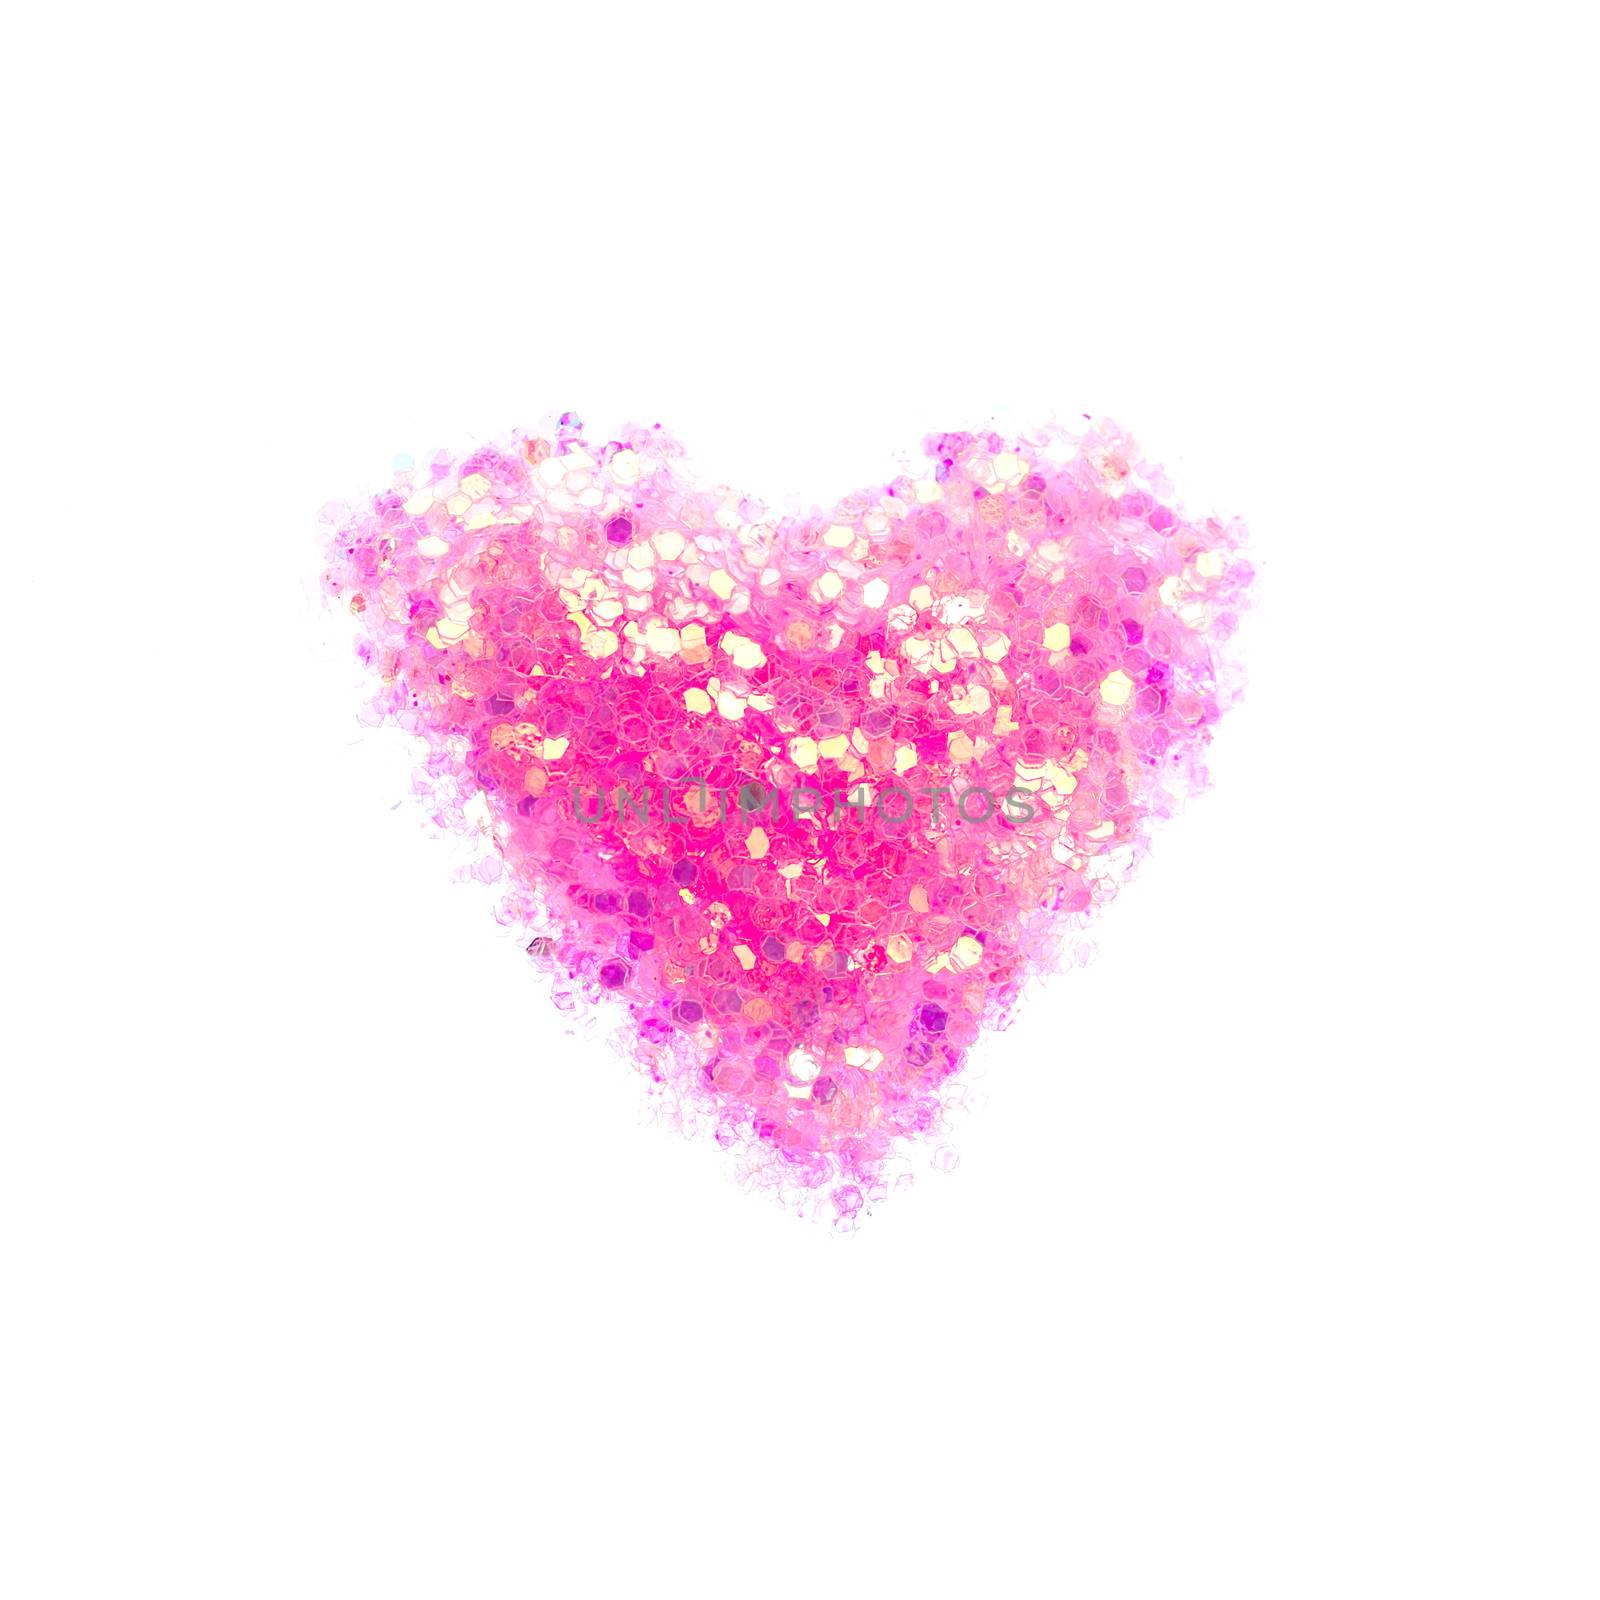 Heart shape on colour background,vintage style by hadkhanong